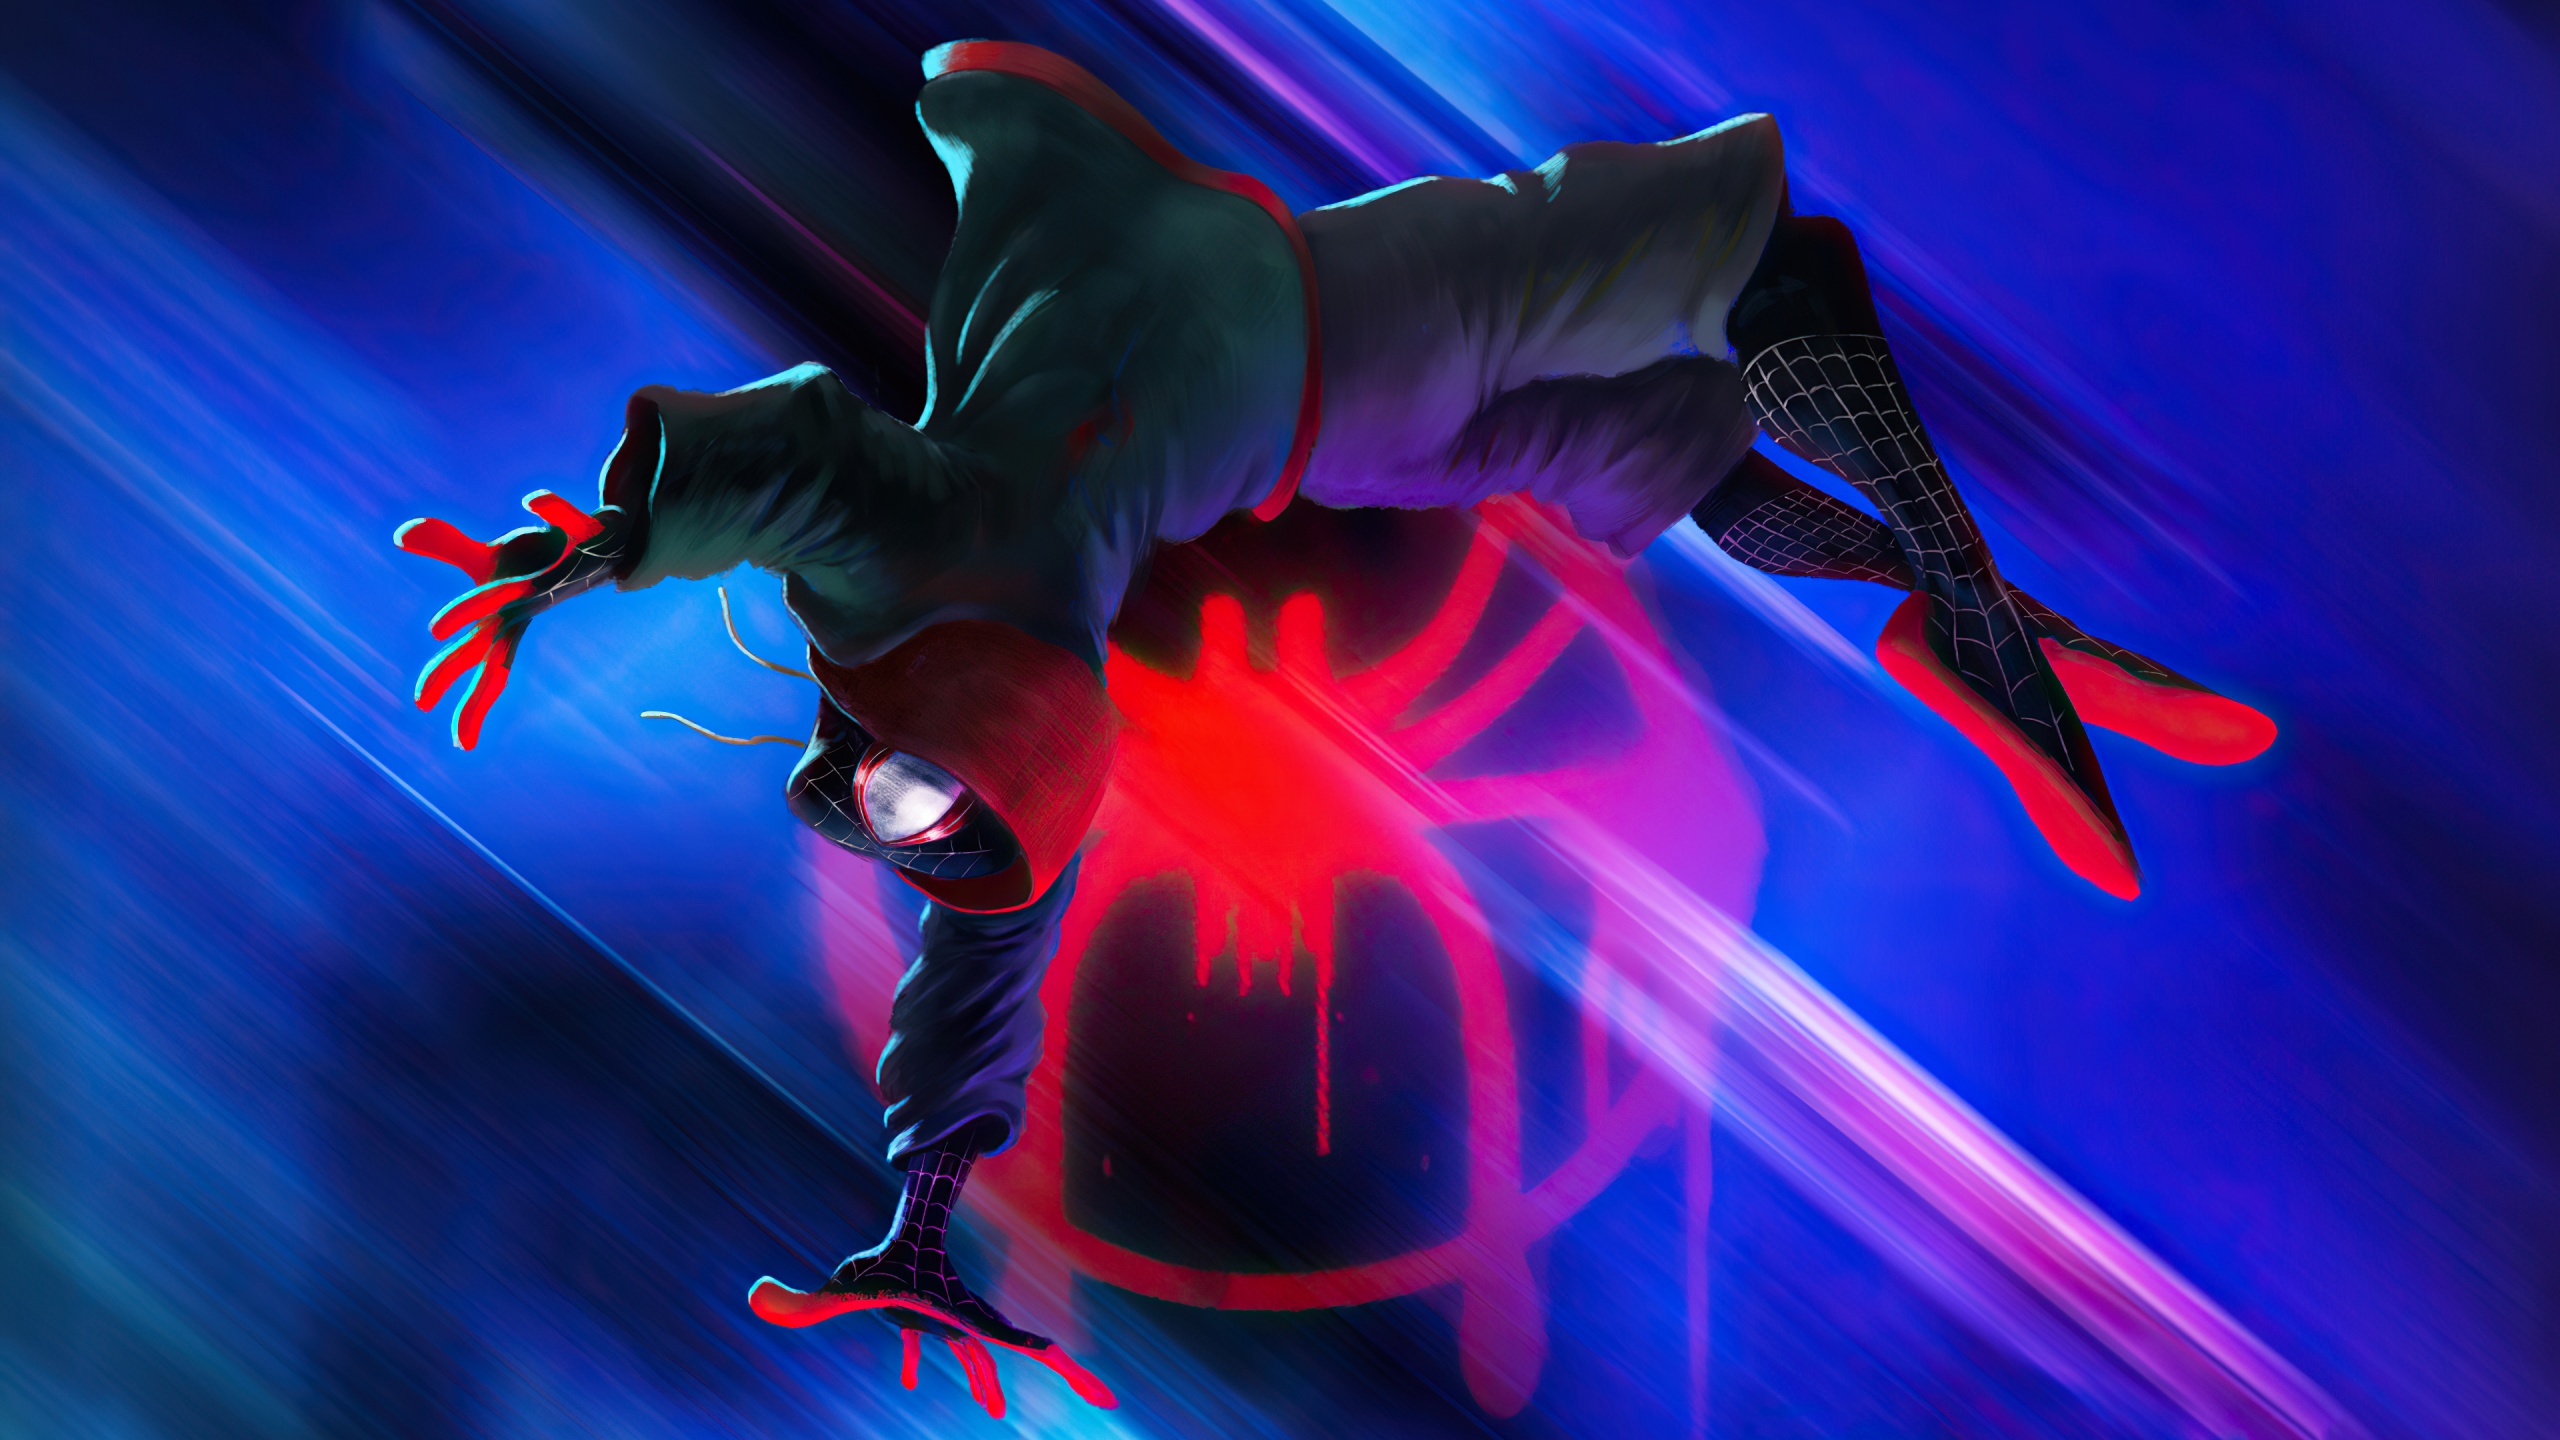 HD wallpaper Movie SpiderMan Into The SpiderVerse Miles Morales  Pixel Art  Wallpaper Flare